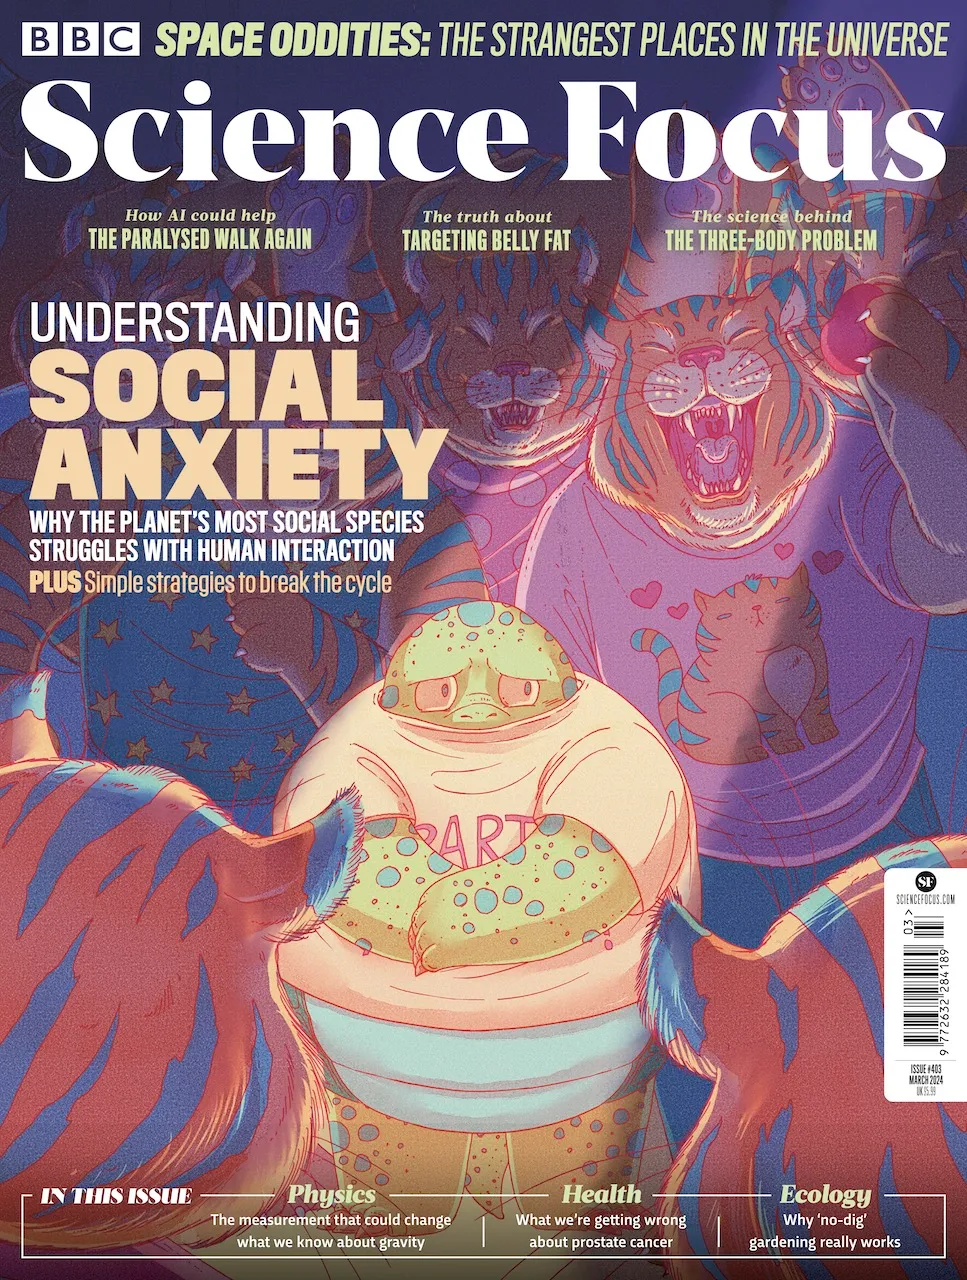 The cover of issue 403 of BBC Science Focus magazine